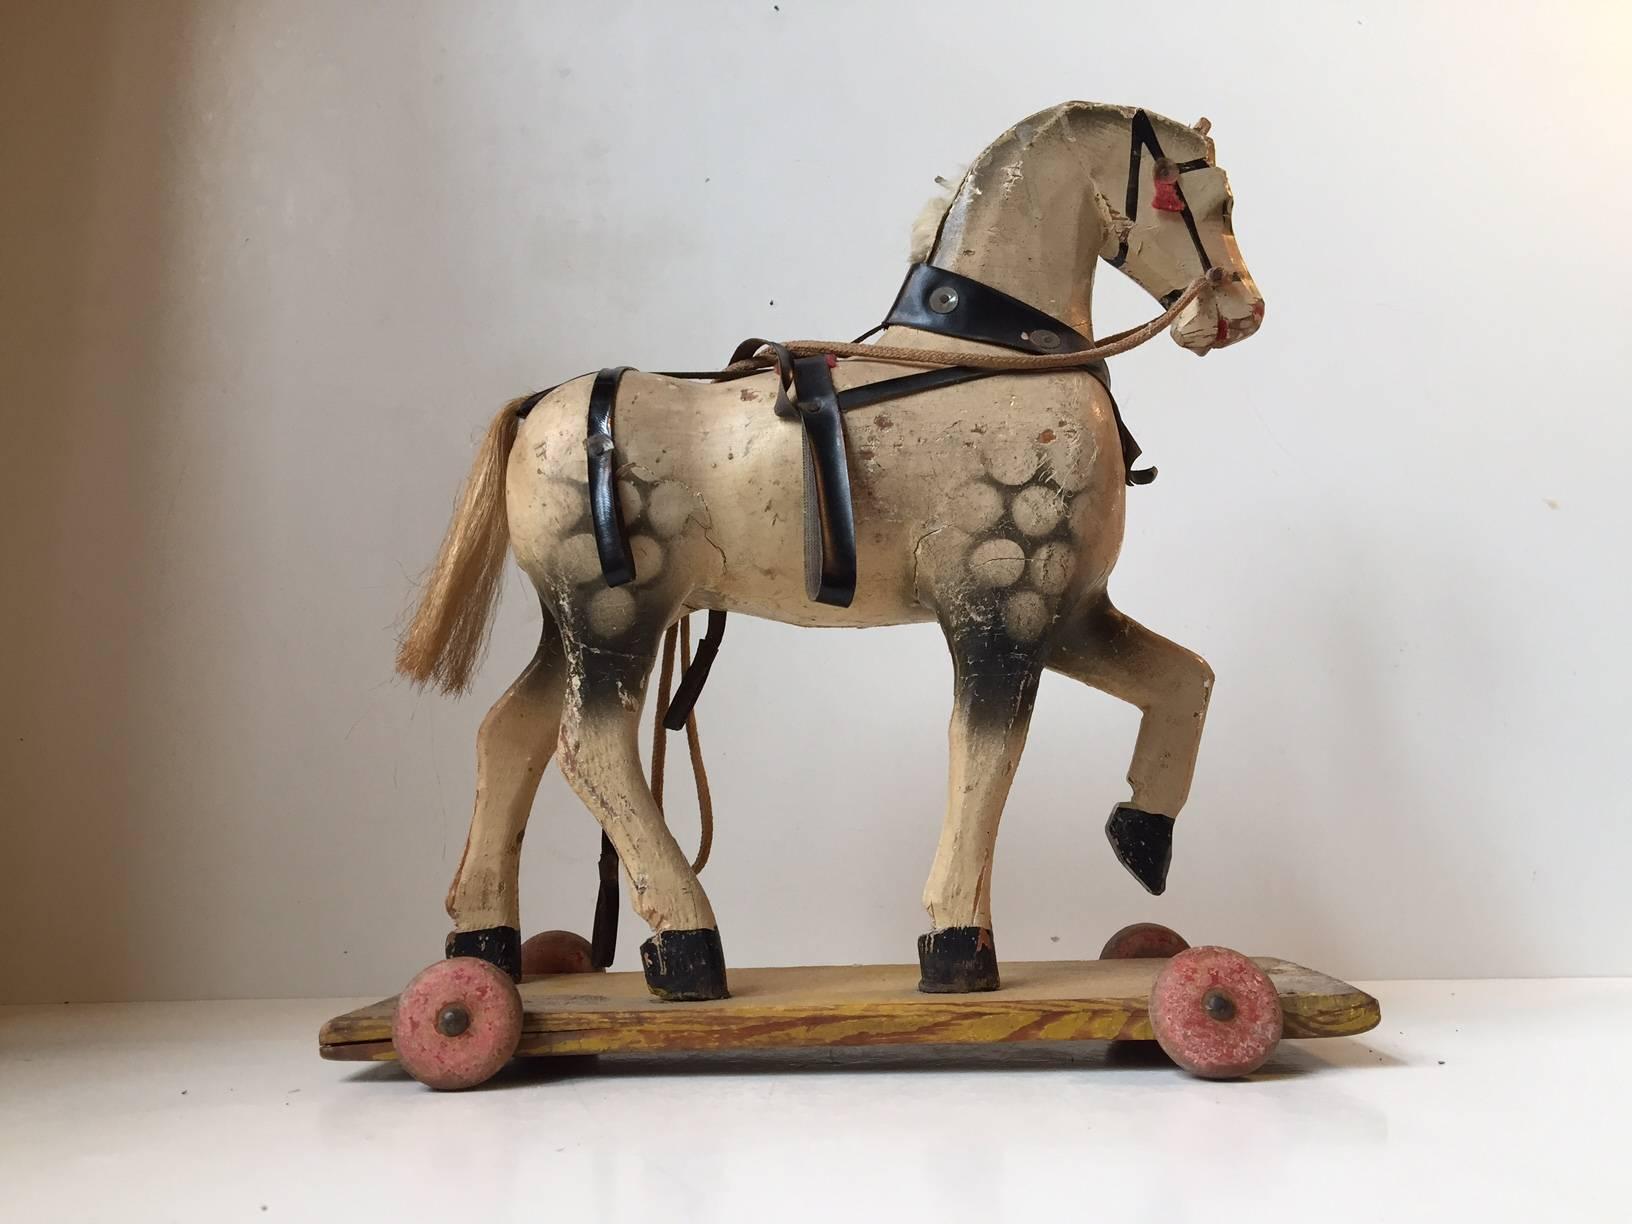 Despite the shabby chic appearance this old hand-carved wooden horse on wooden wheels remains fully functional. Crafted in Germany during the 1930s. Richly patinated from top to bottom. Measure: Height 27 cm (10.6 inches), width 24 cm (9.5 inches).